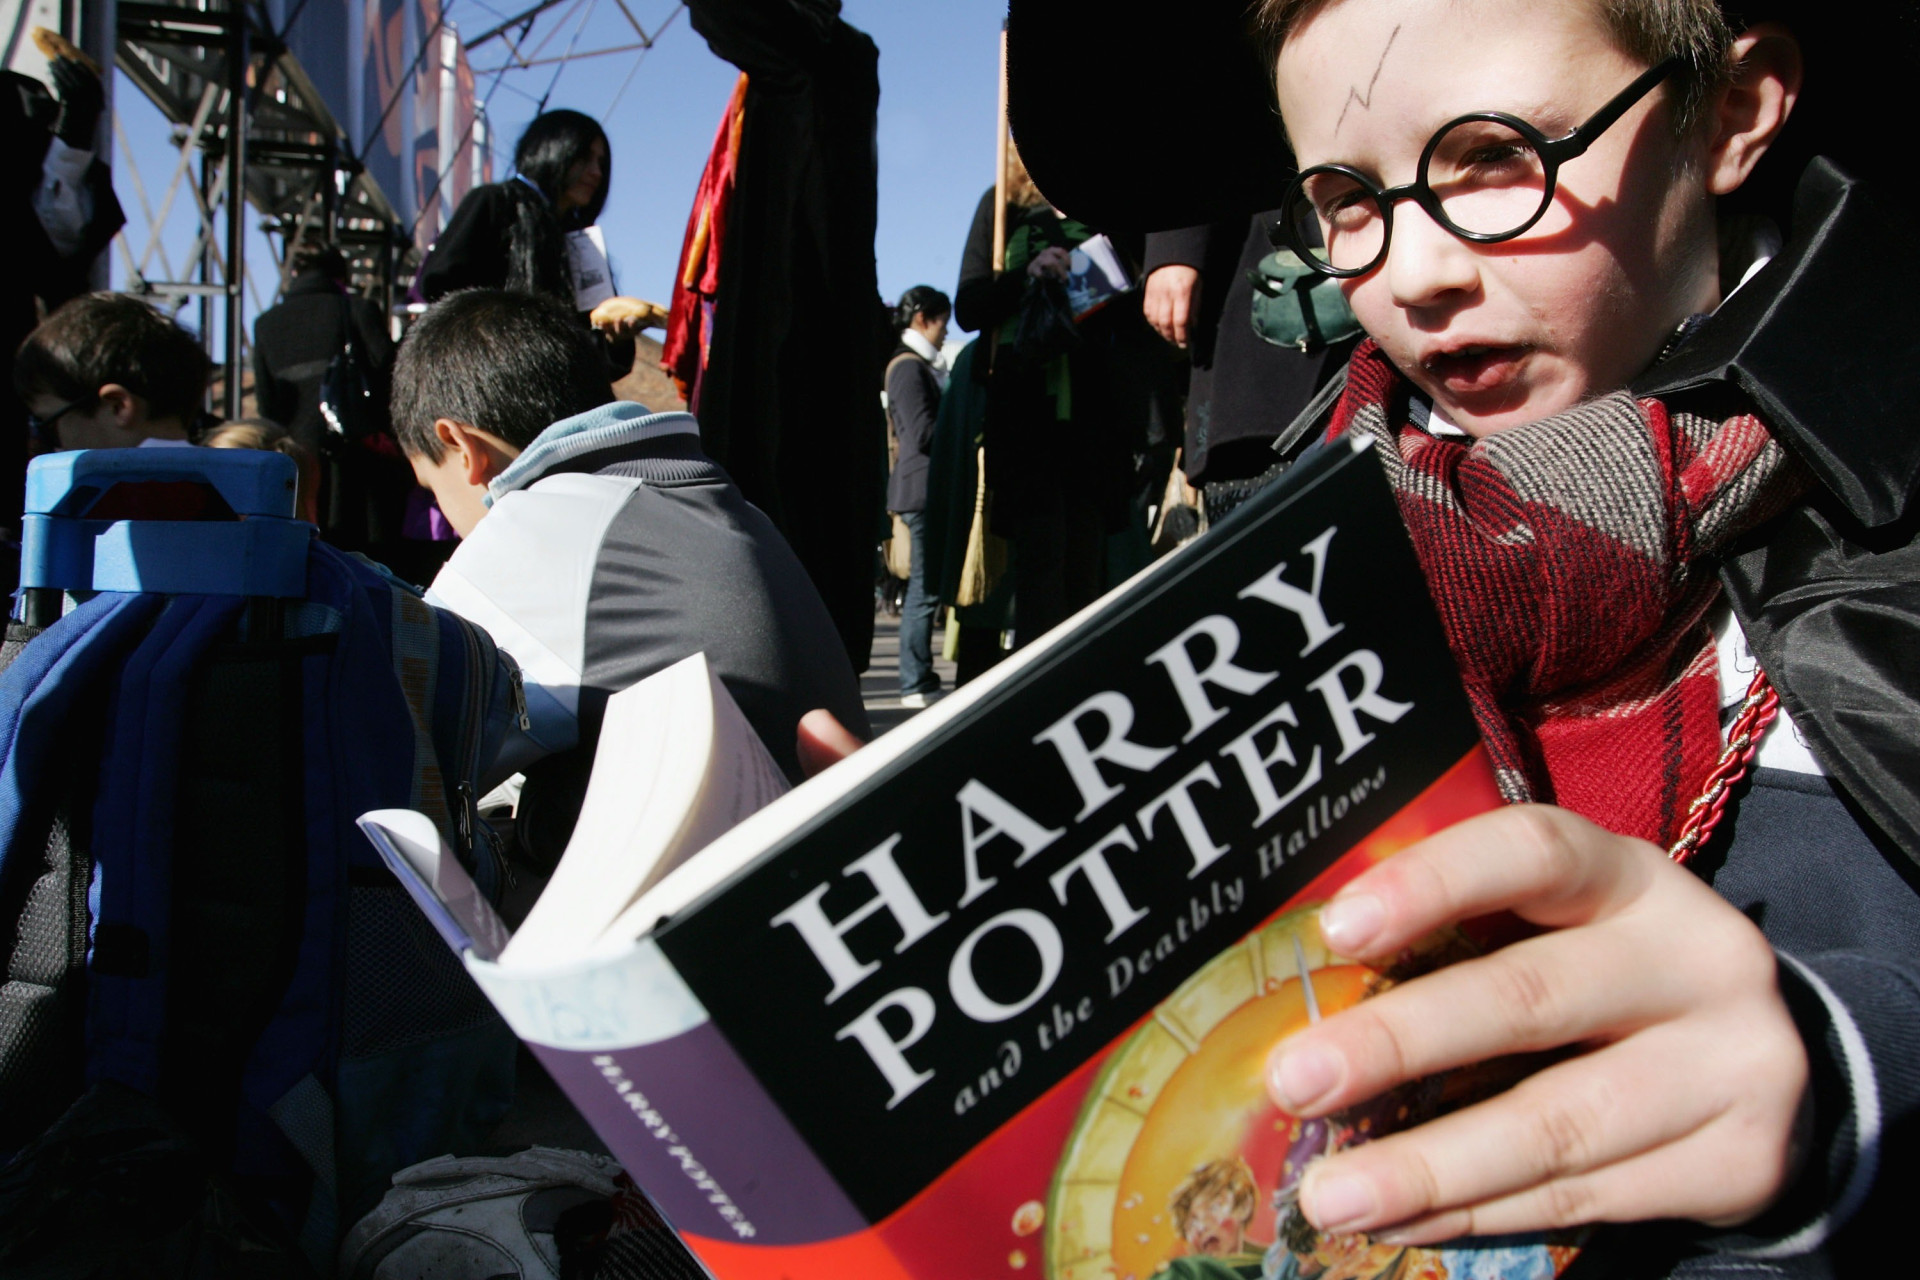 Ten years after releasing the first book, the British author published the final novel about the young wizard. 'Harry Potter and the Deathly Hallows' was translated into around 65 different languages.<p><a href="https://www.msn.com/en-us/community/channel/vid-7xx8mnucu55yw63we9va2gwr7uihbxwc68fxqp25x6tg4ftibpra?cvid=94631541bc0f4f89bfd59158d696ad7e">Follow us and access great exclusive content every day</a></p>